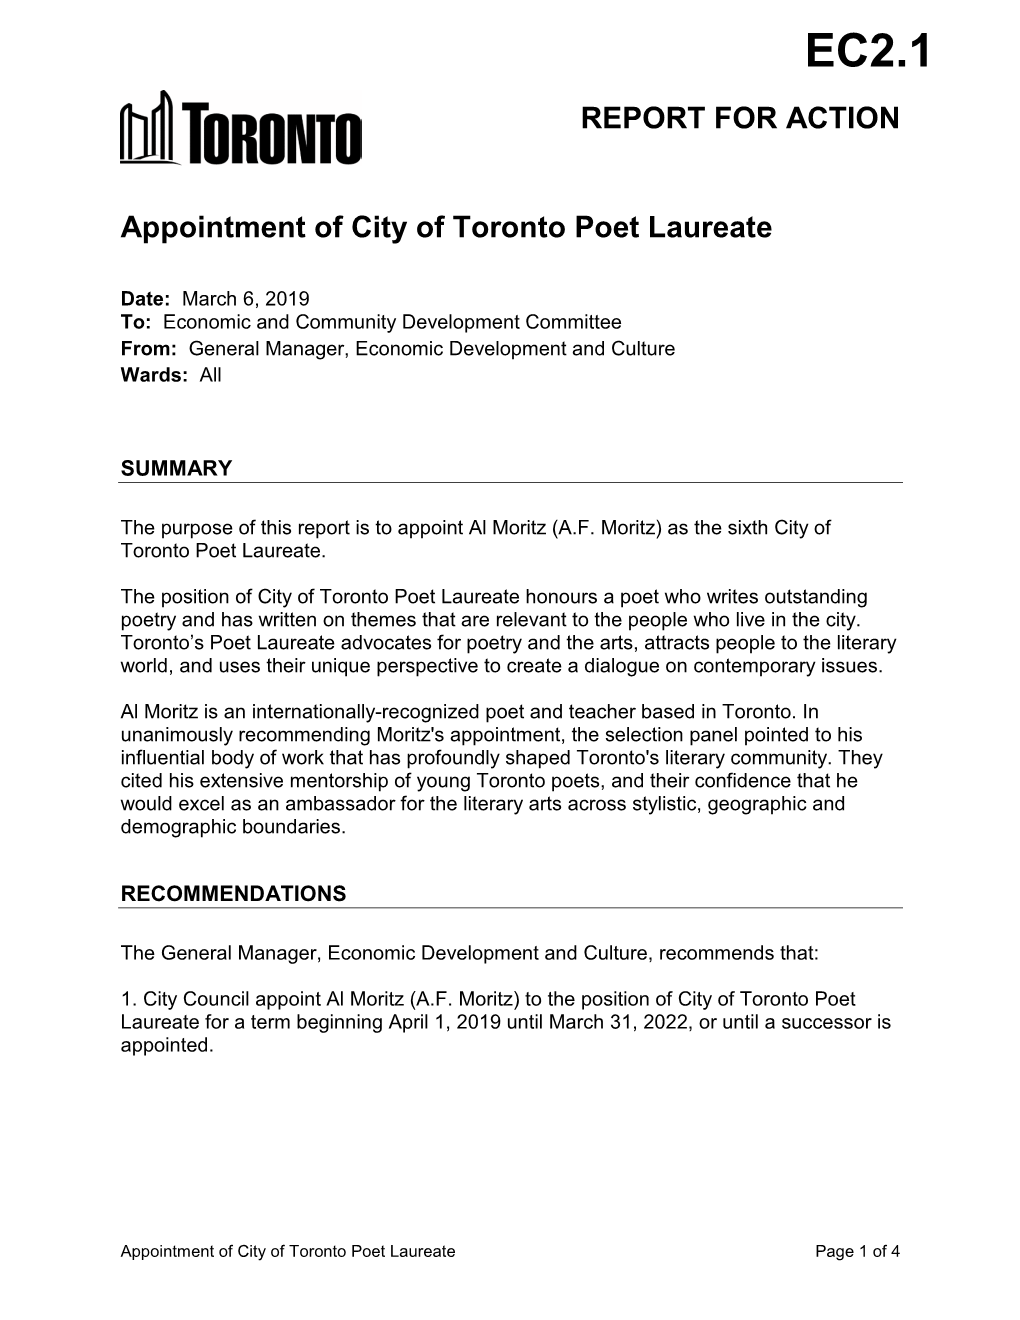 Appointment of City of Toronto Poet Laureate